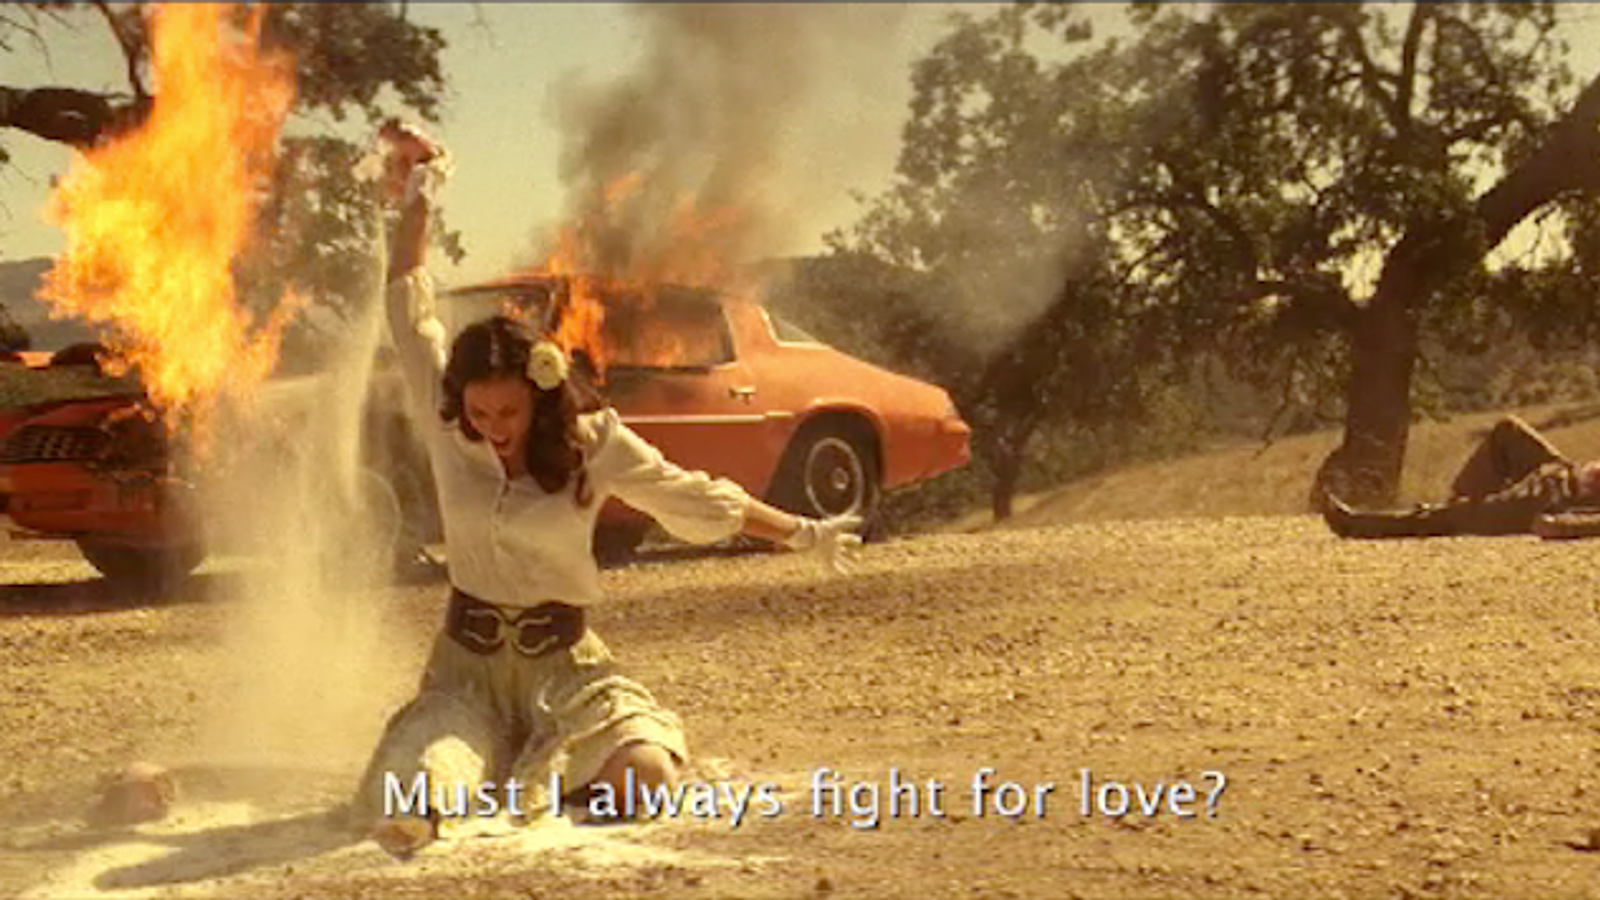 Fight For Love